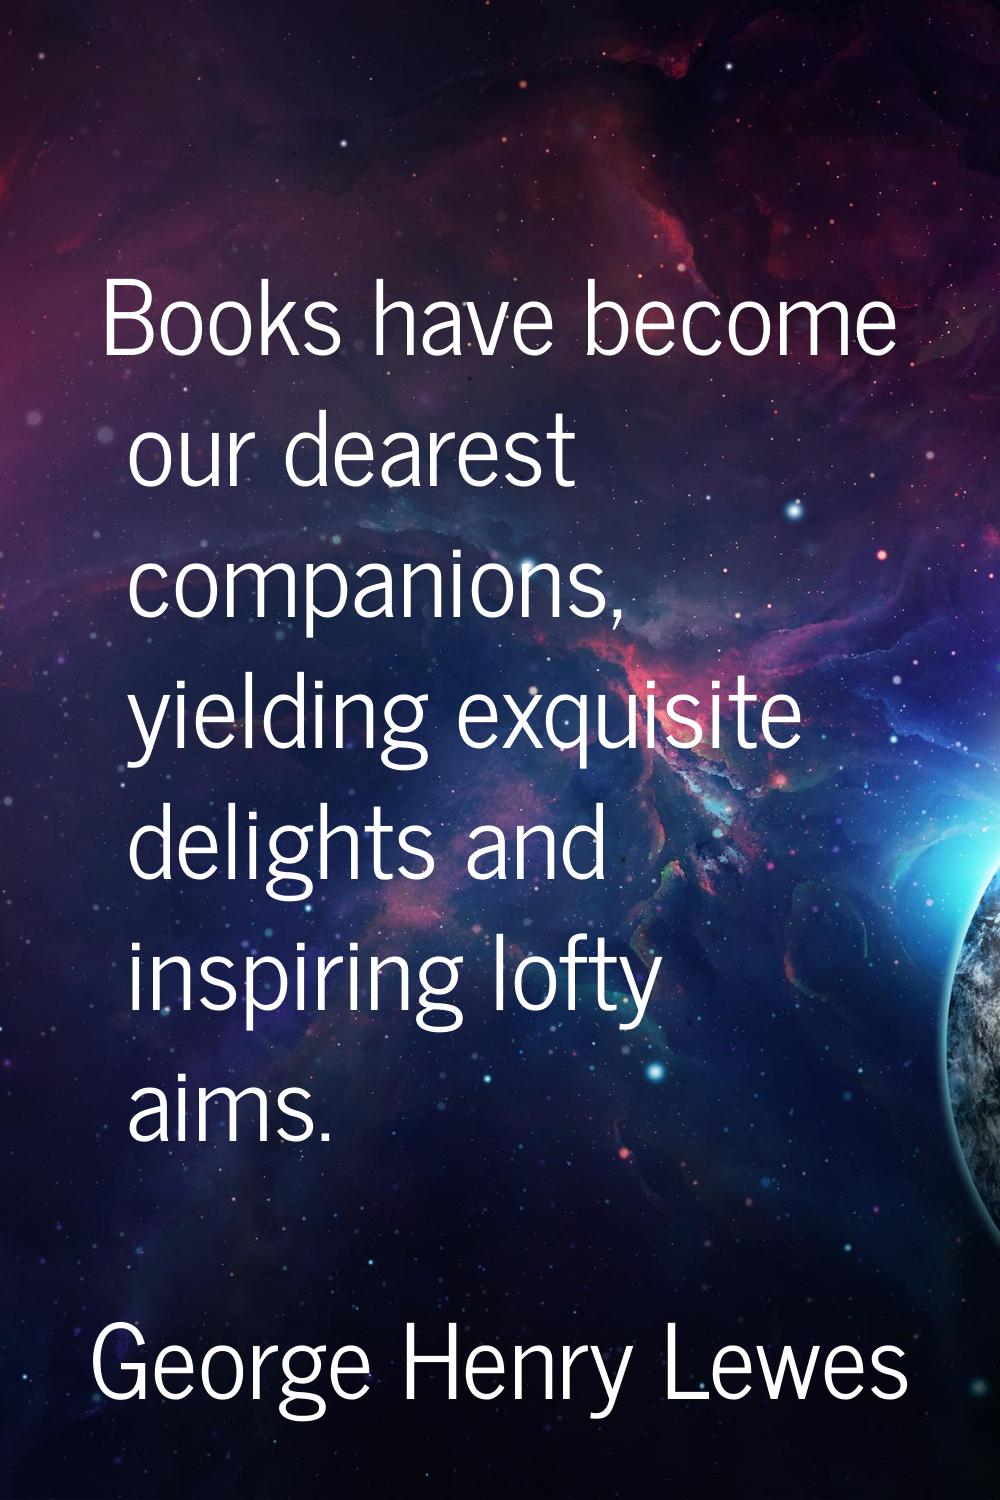 Books have become our dearest companions, yielding exquisite delights and inspiring lofty aims.